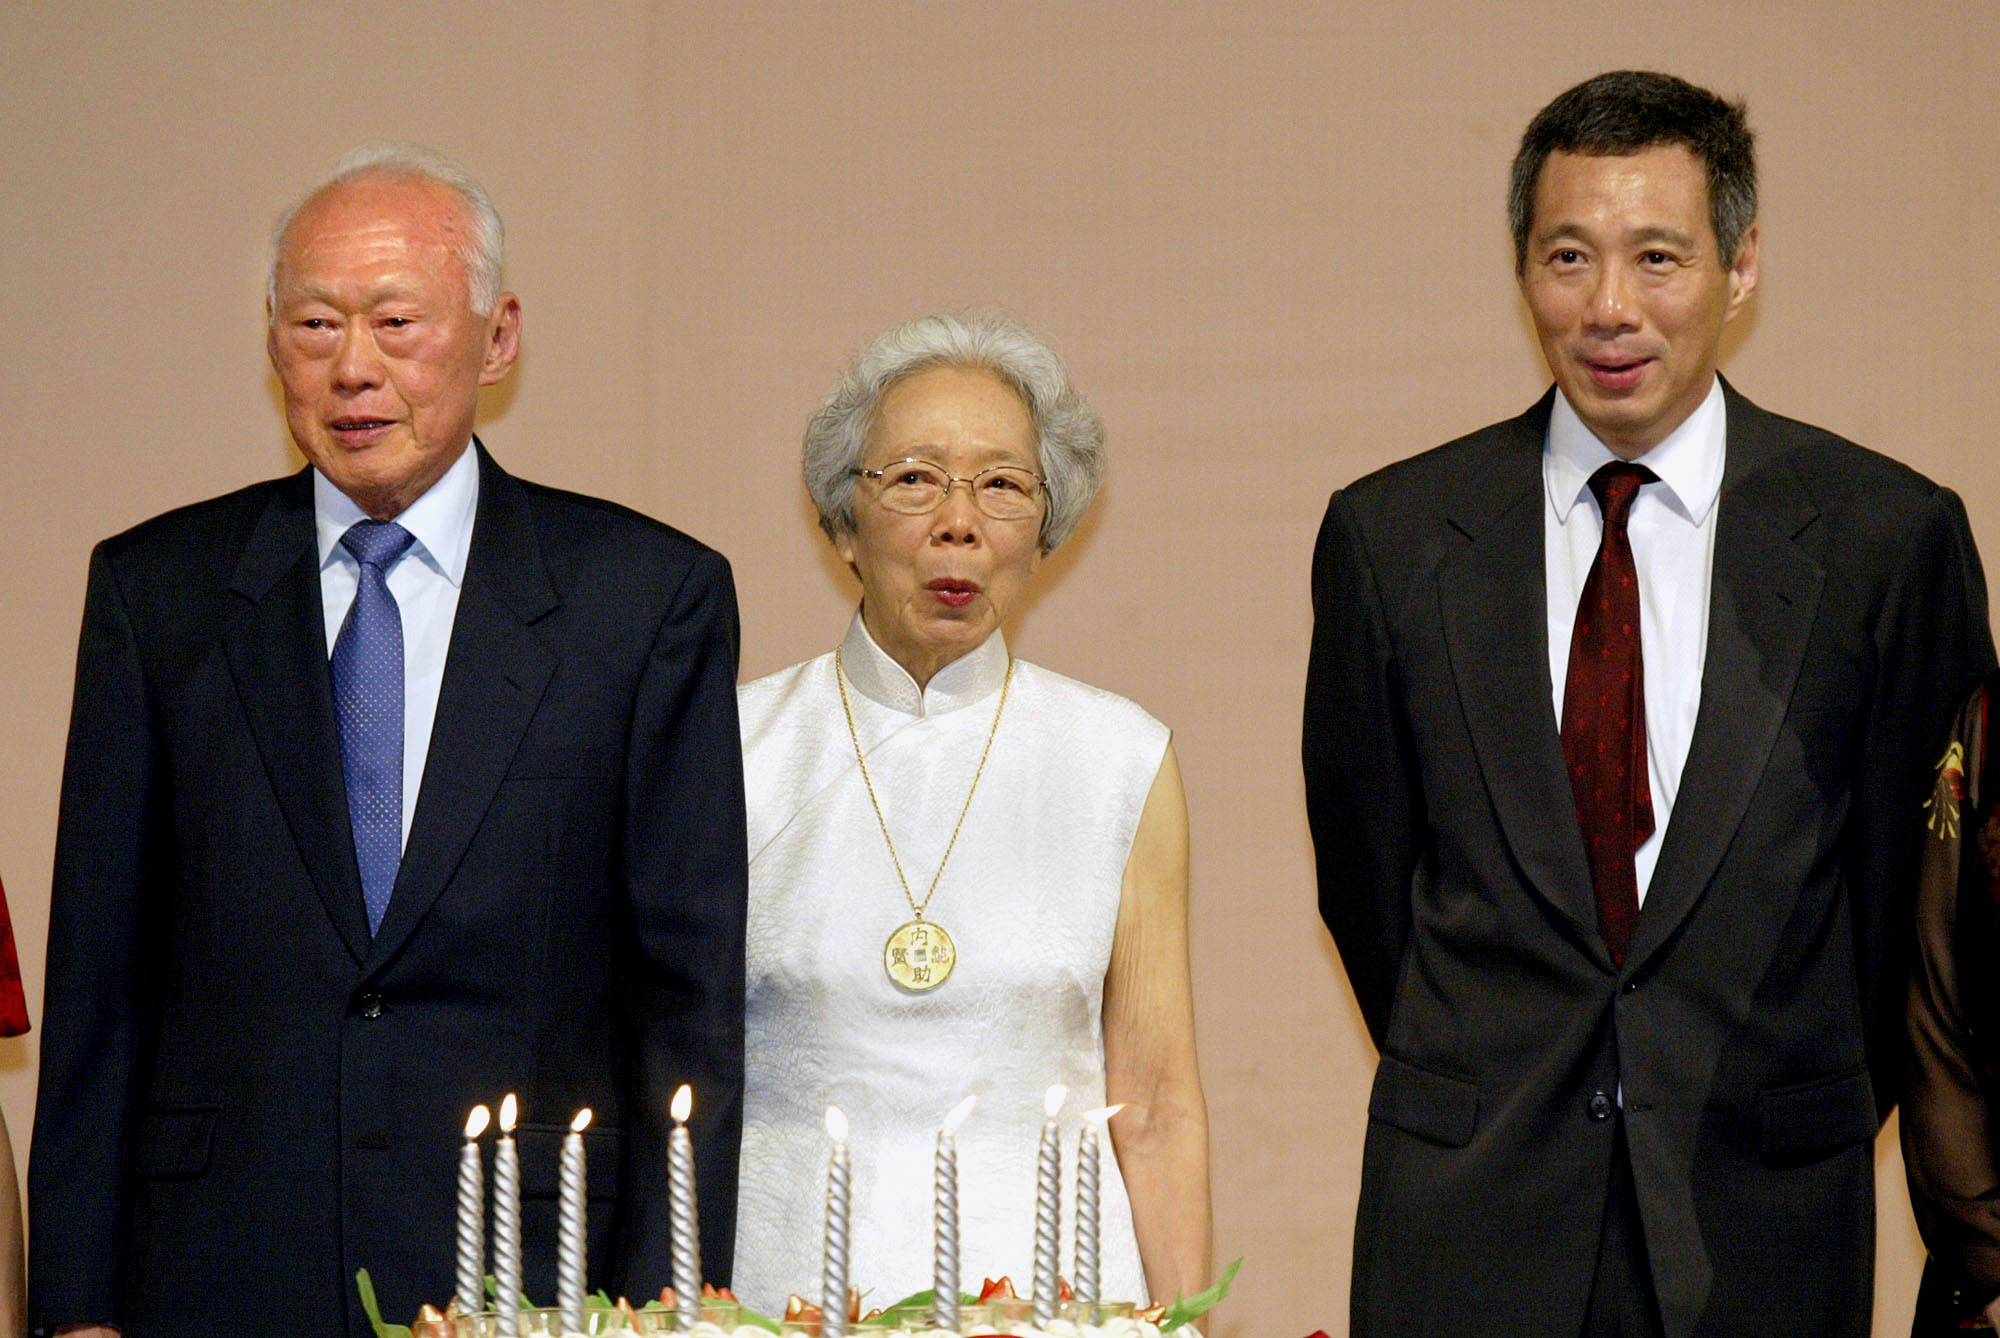 ** FILE ** Singapore's Deputy Prime Minister Mr Lee Hsien Loong, right, Lee's father and Singapore's Senior Minister Lee Kwan Yu, left, and his mother Kwa Geok Choo observe the senior Lee's 80th Birthday in this Sept. 16, 2003 file photo in Singapore. Singapore's government has announced Saturday, July 17, 2004 that Lee will take over as prime minister, replacing Goh Chok Tong on Aug. 12. (AP Photo/Ed Wray, File)